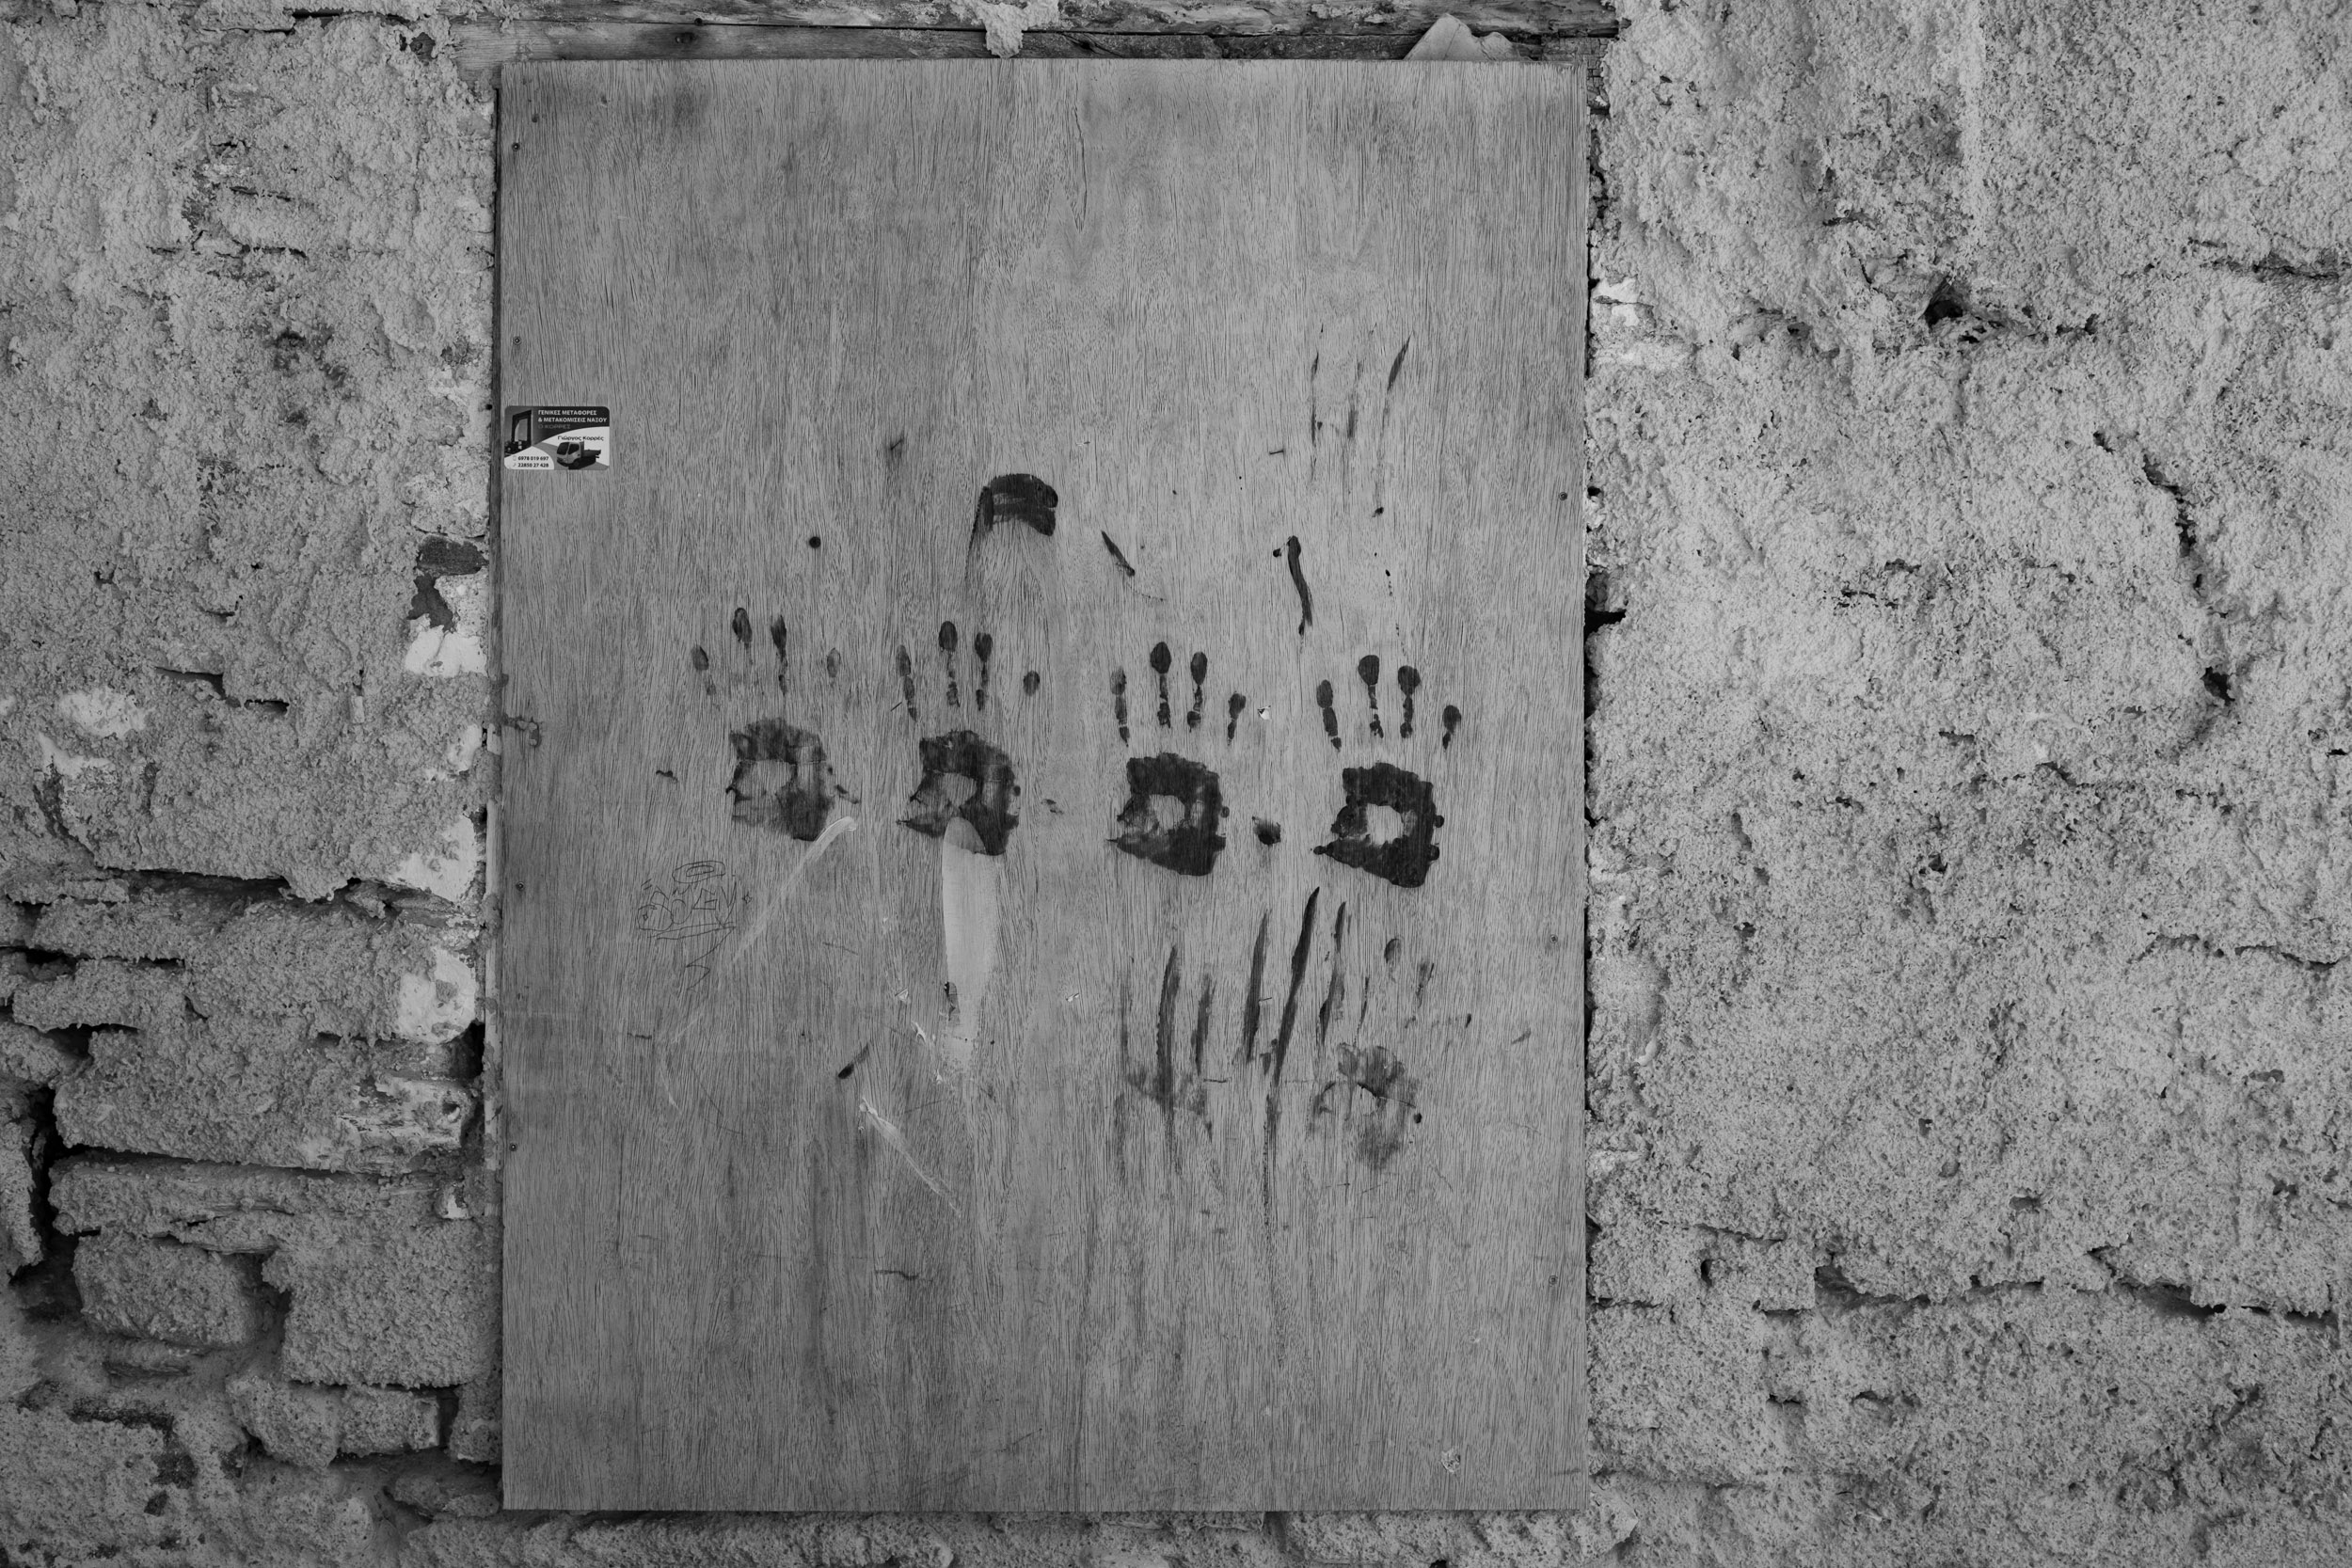 Handprints on a wooden wall in Naxos, Greece.